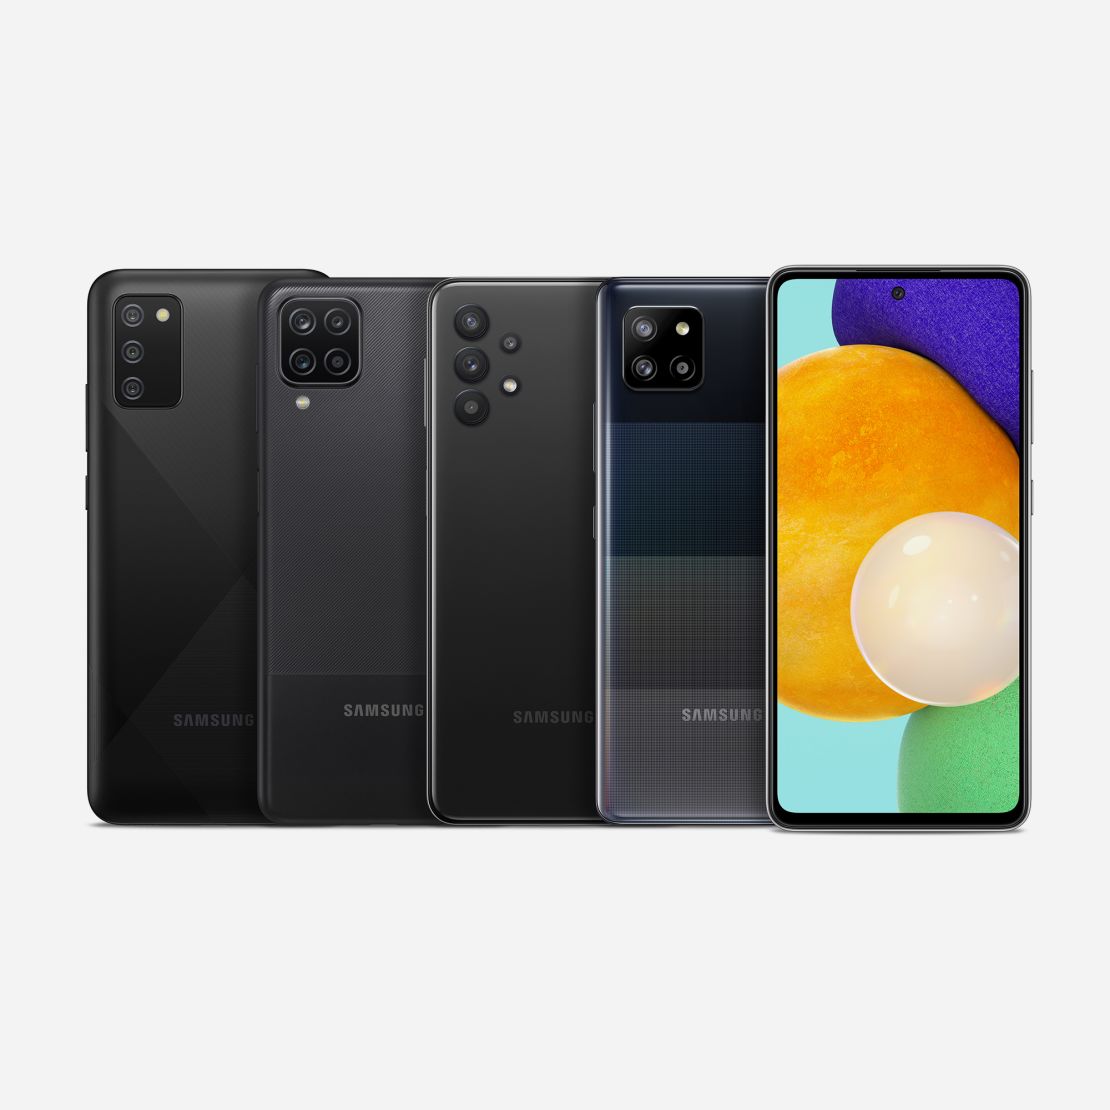 Samsung Announces New Galaxy A Series with Upgrades to Essential